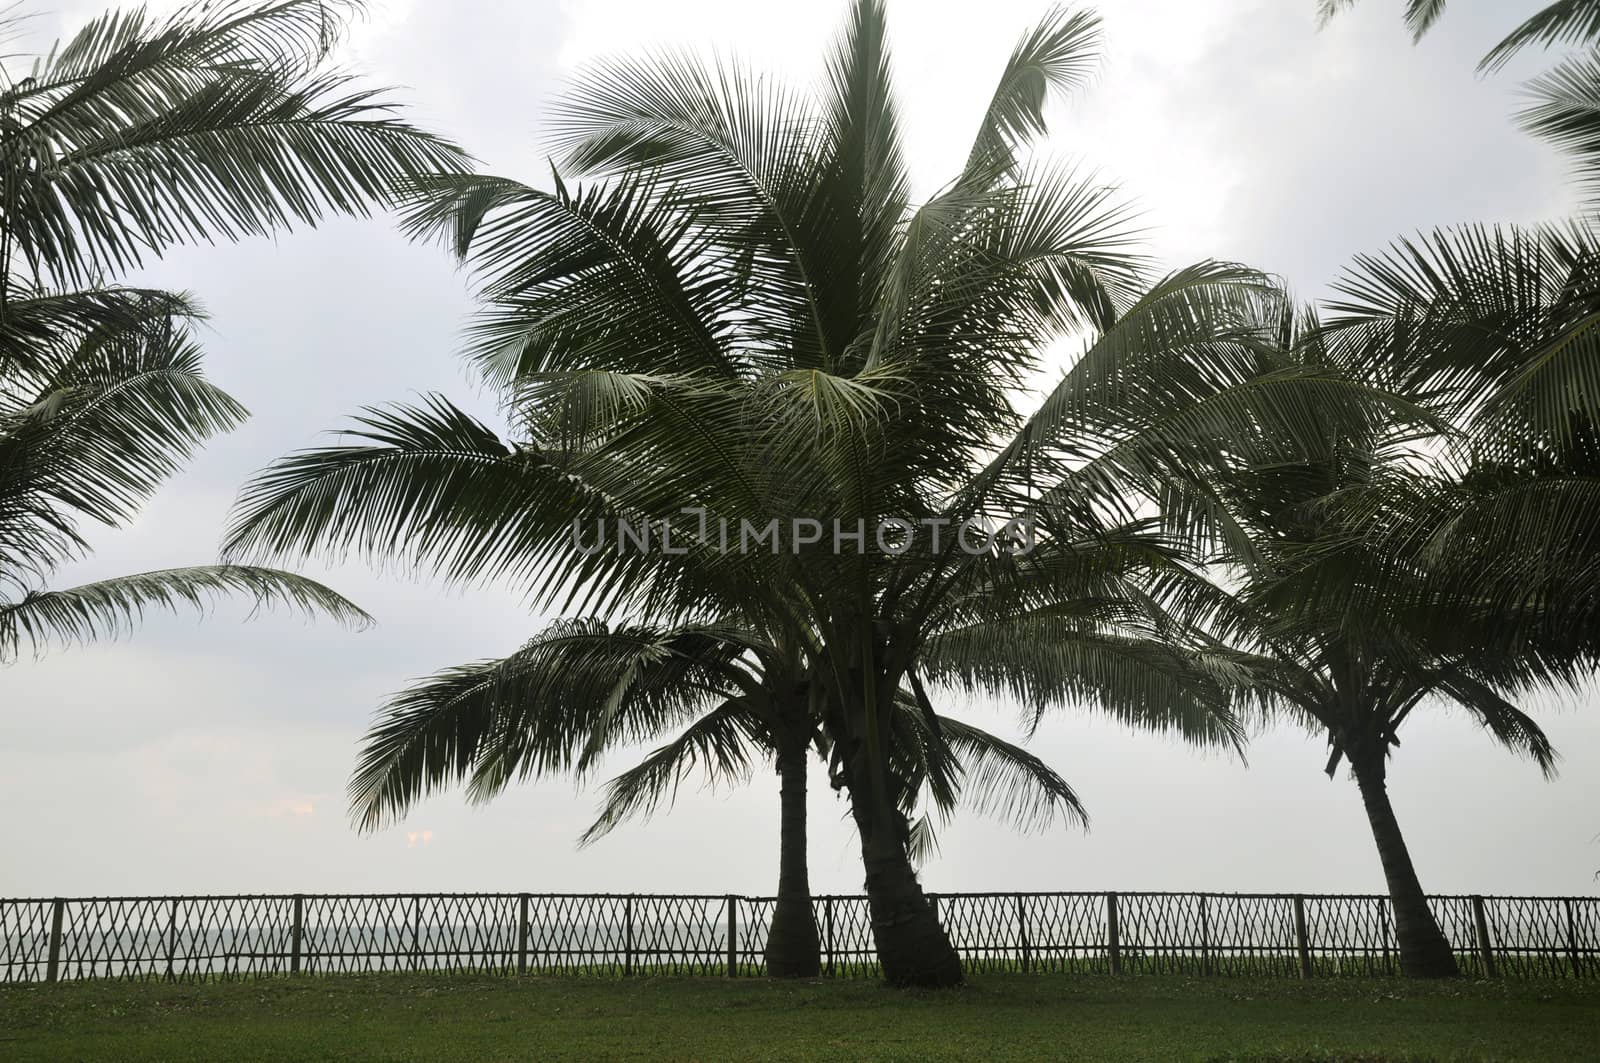 Palm trees in a lawn against a fence separating it from the beach